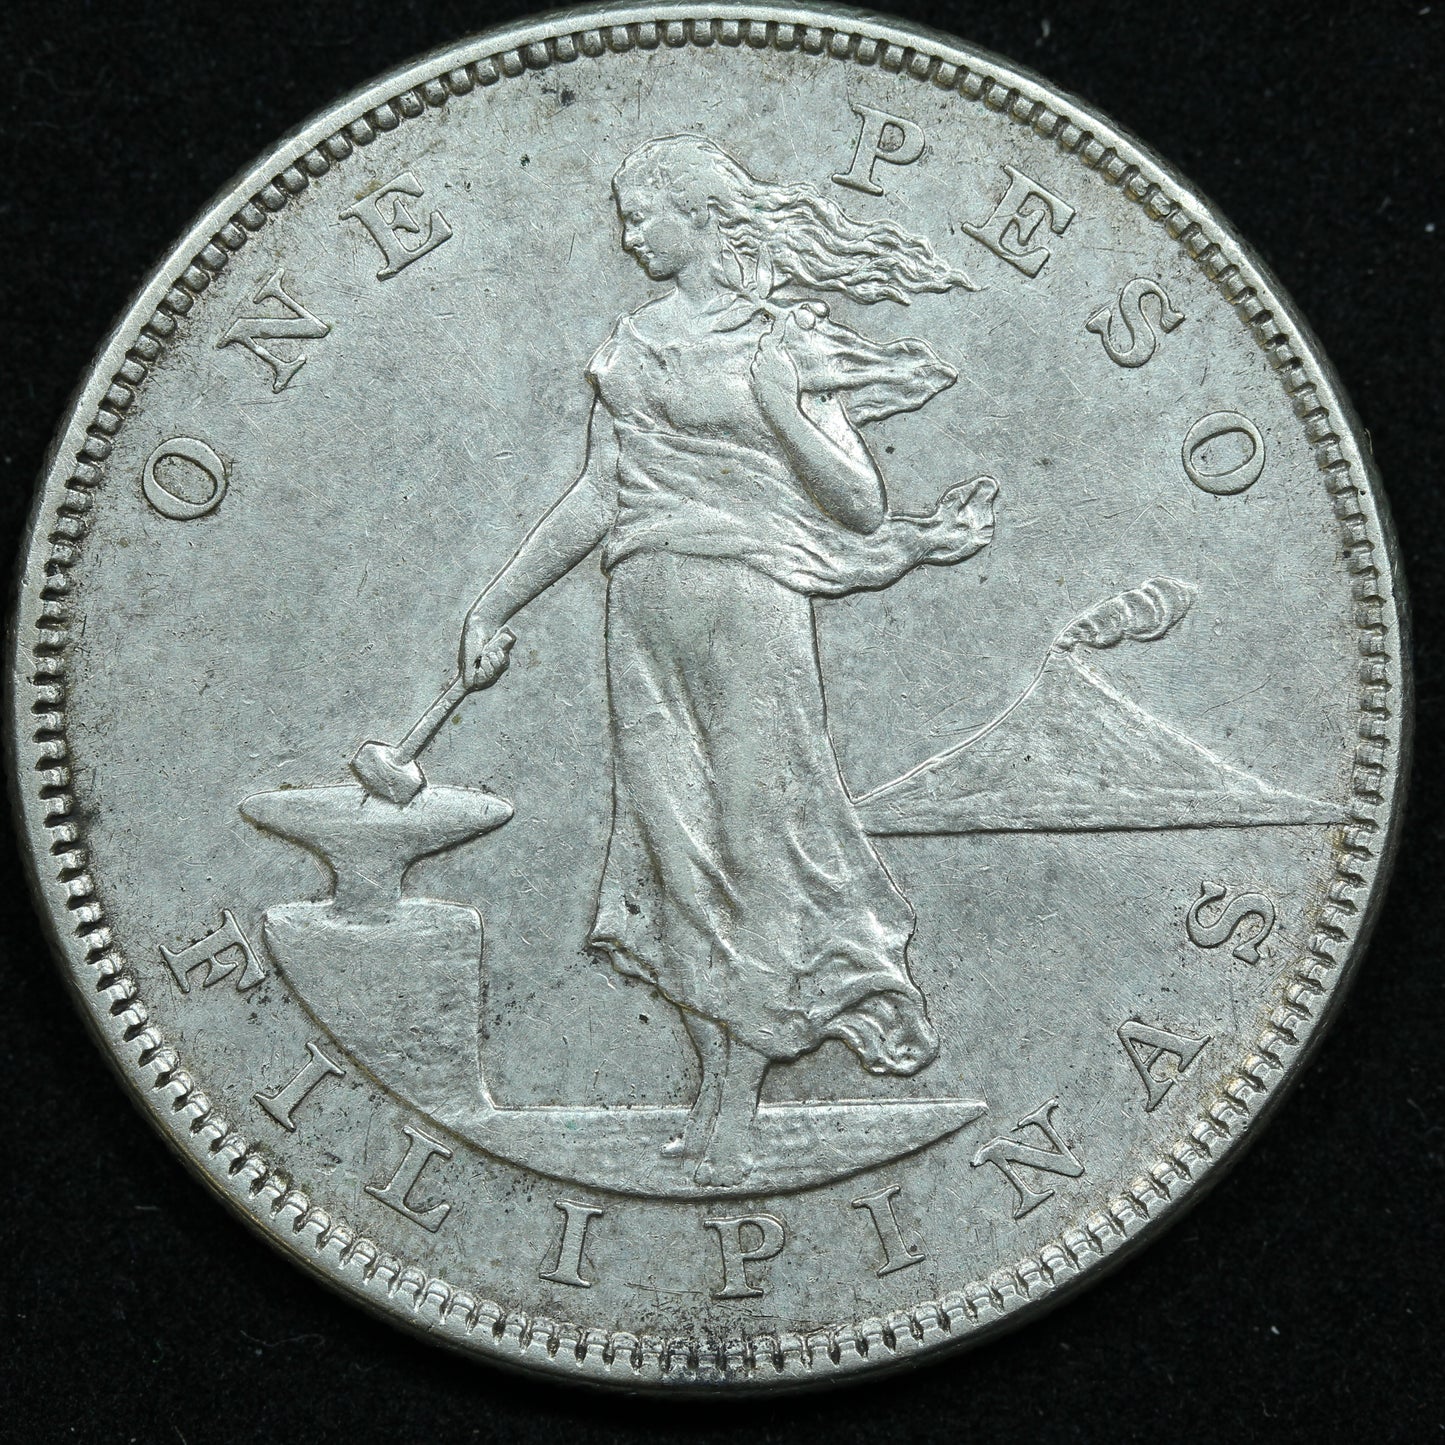 1904 S 1 One Peso Philippines Silver Coin - KM# 168